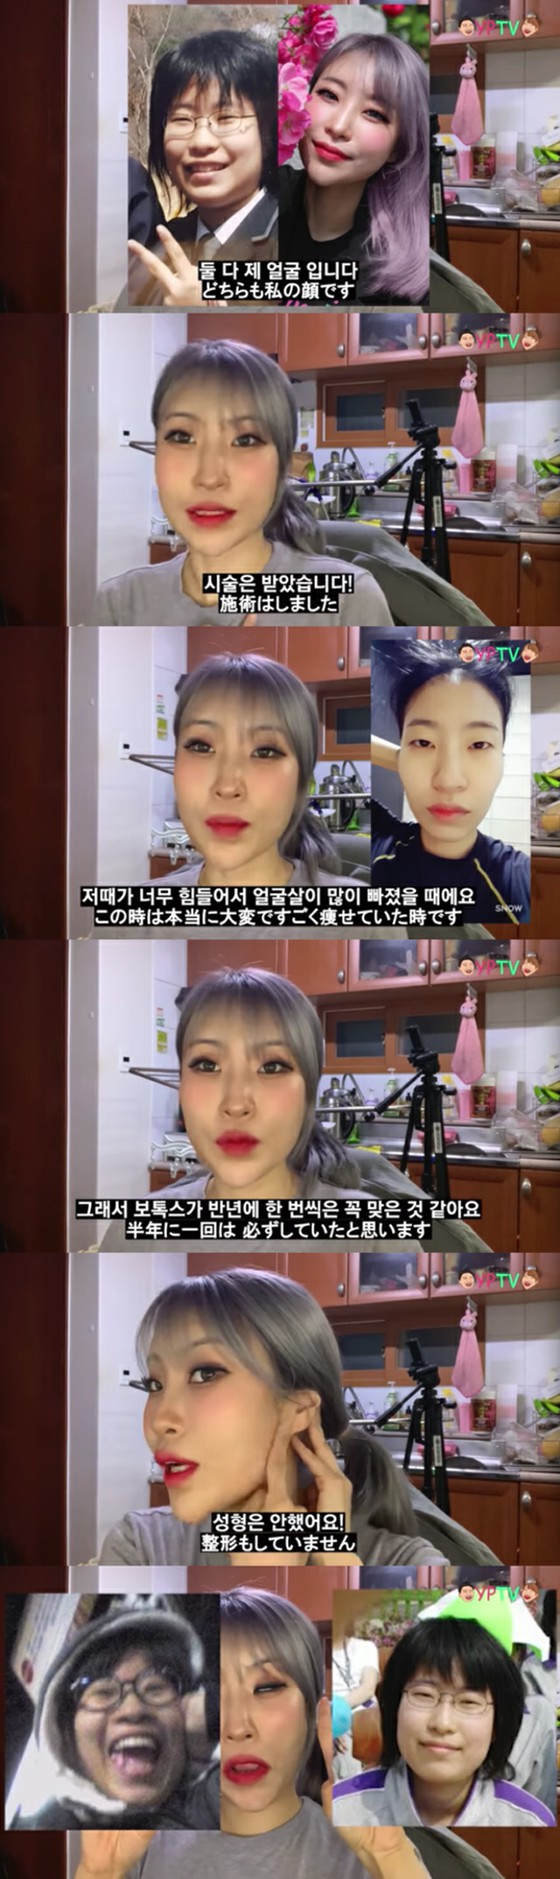 Lee Se Yeong, a comedian, mentions her own plastic surgery rumor... What secret were revealed comparing with photos from the past?